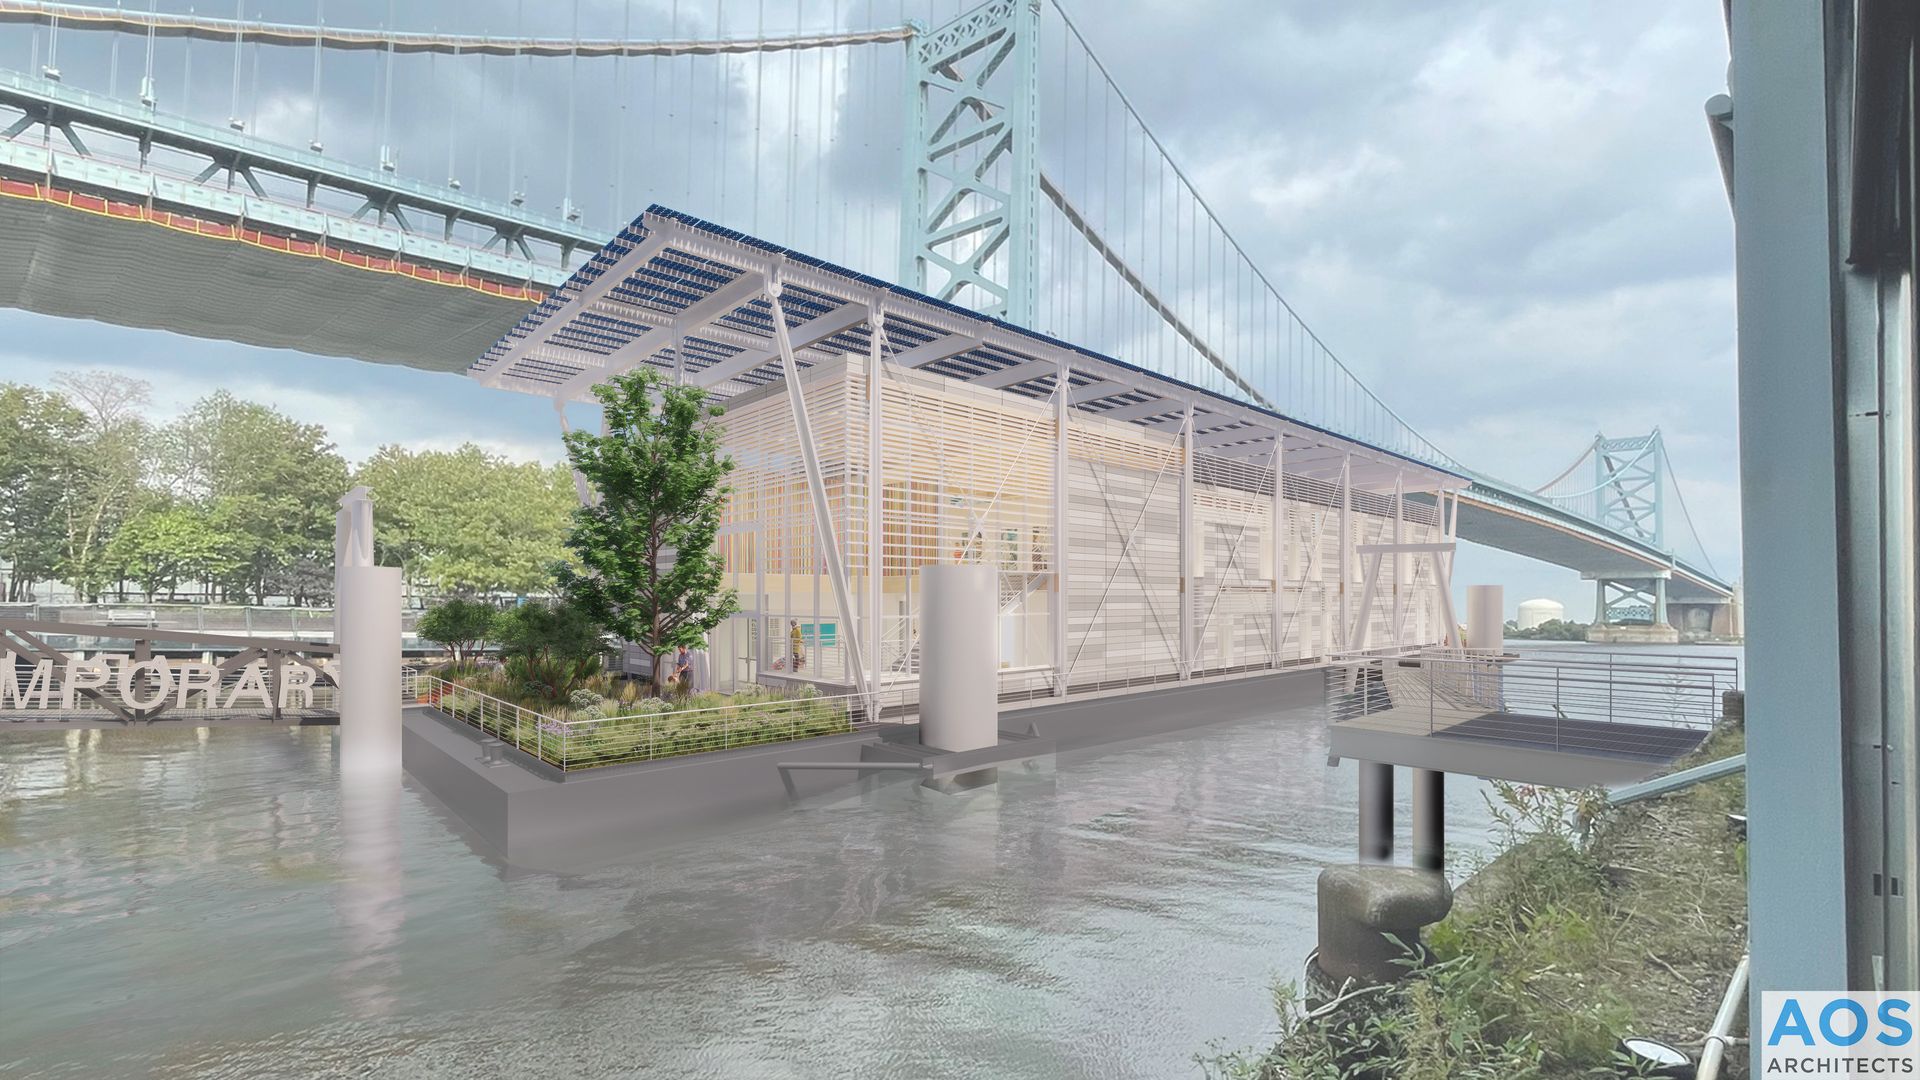 Rendering of a project to construct a floating art gallery along the Delaware River in Philadelphia.